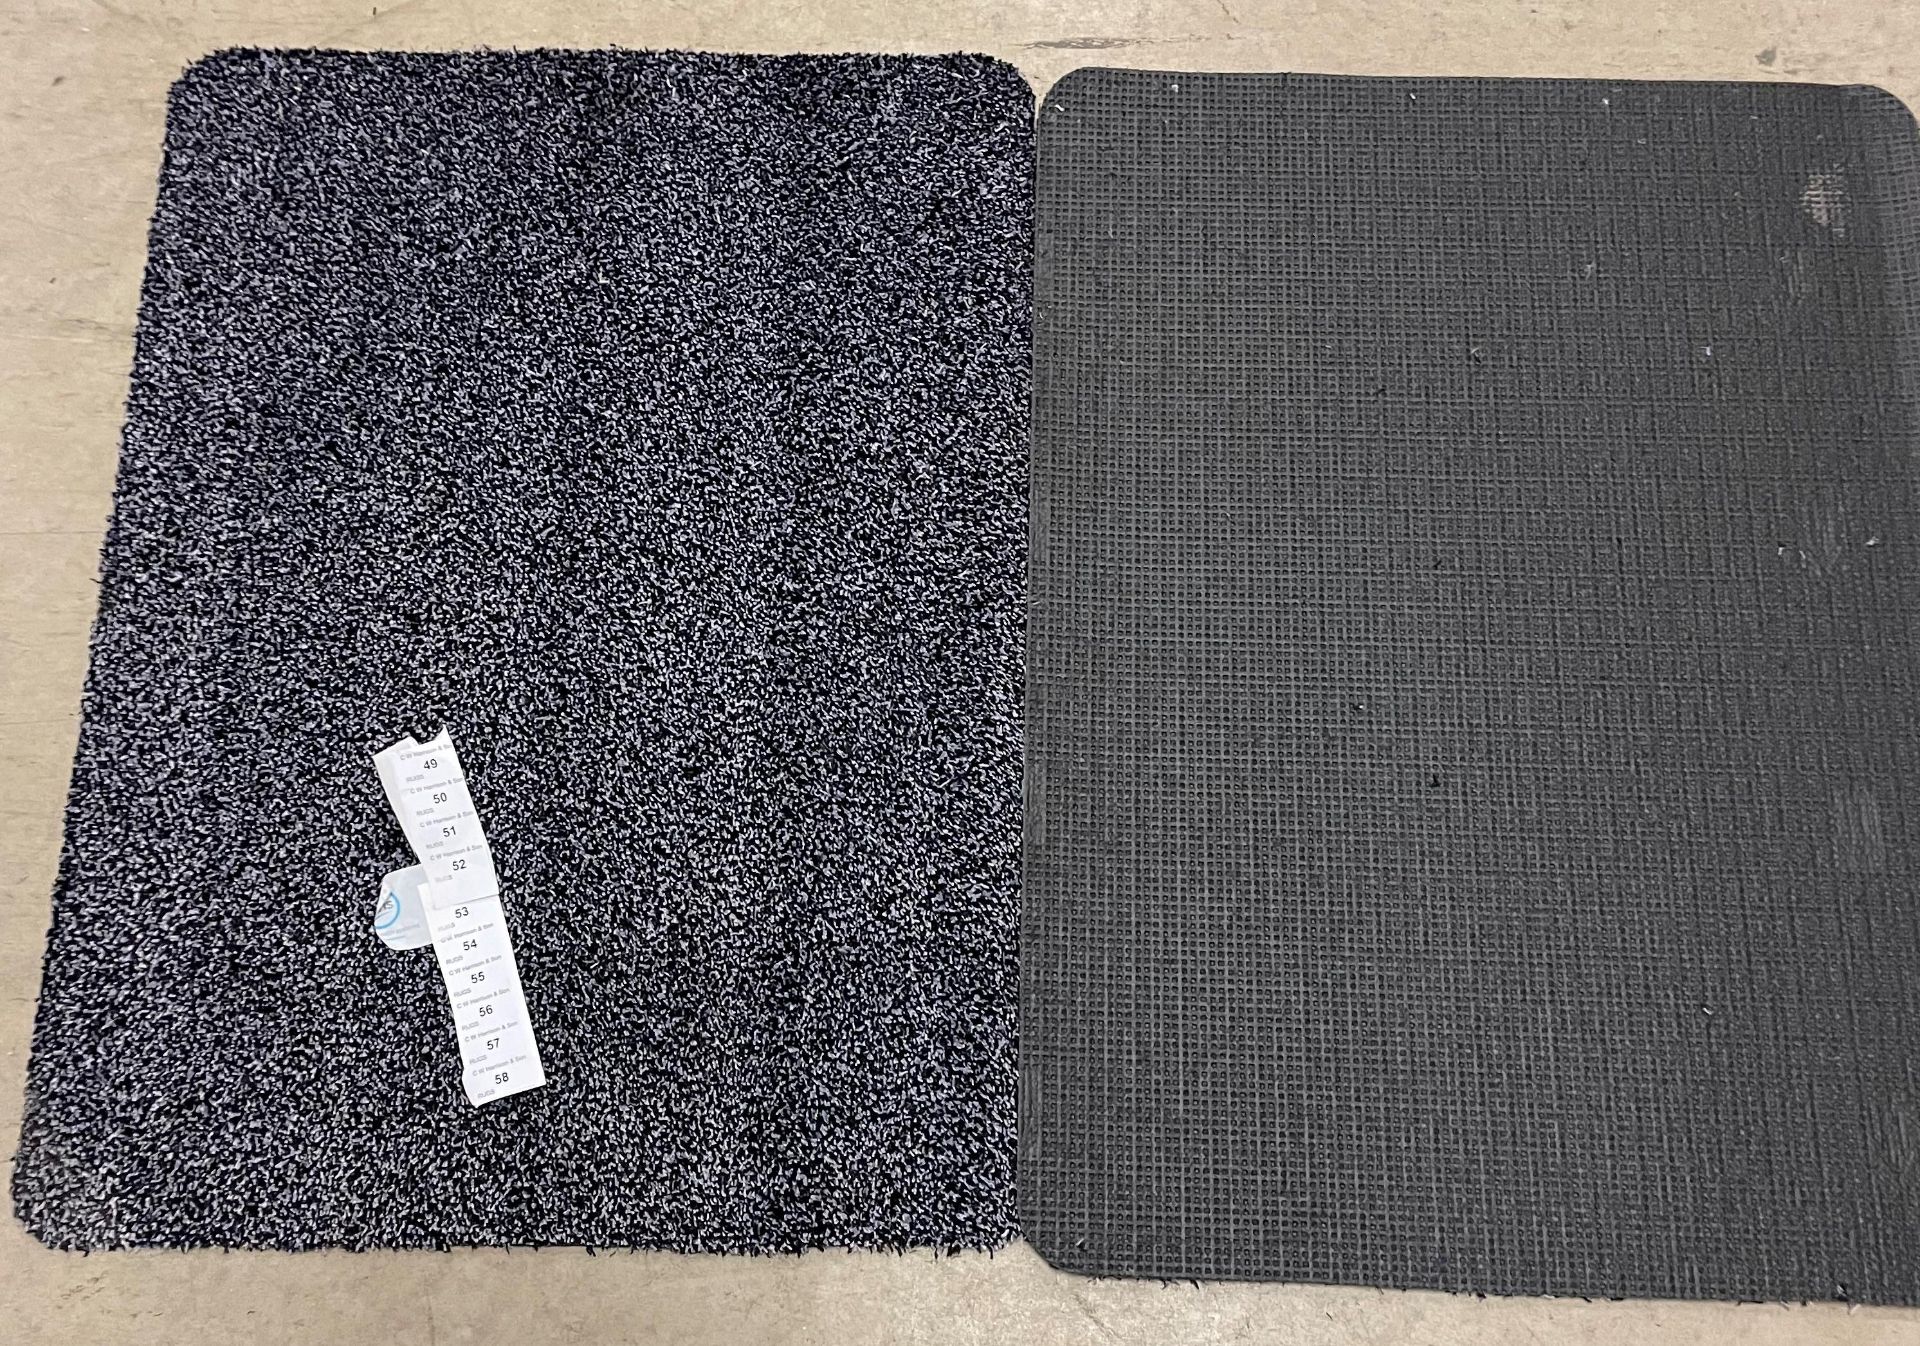 10 x black/white speckled rubber backed mats